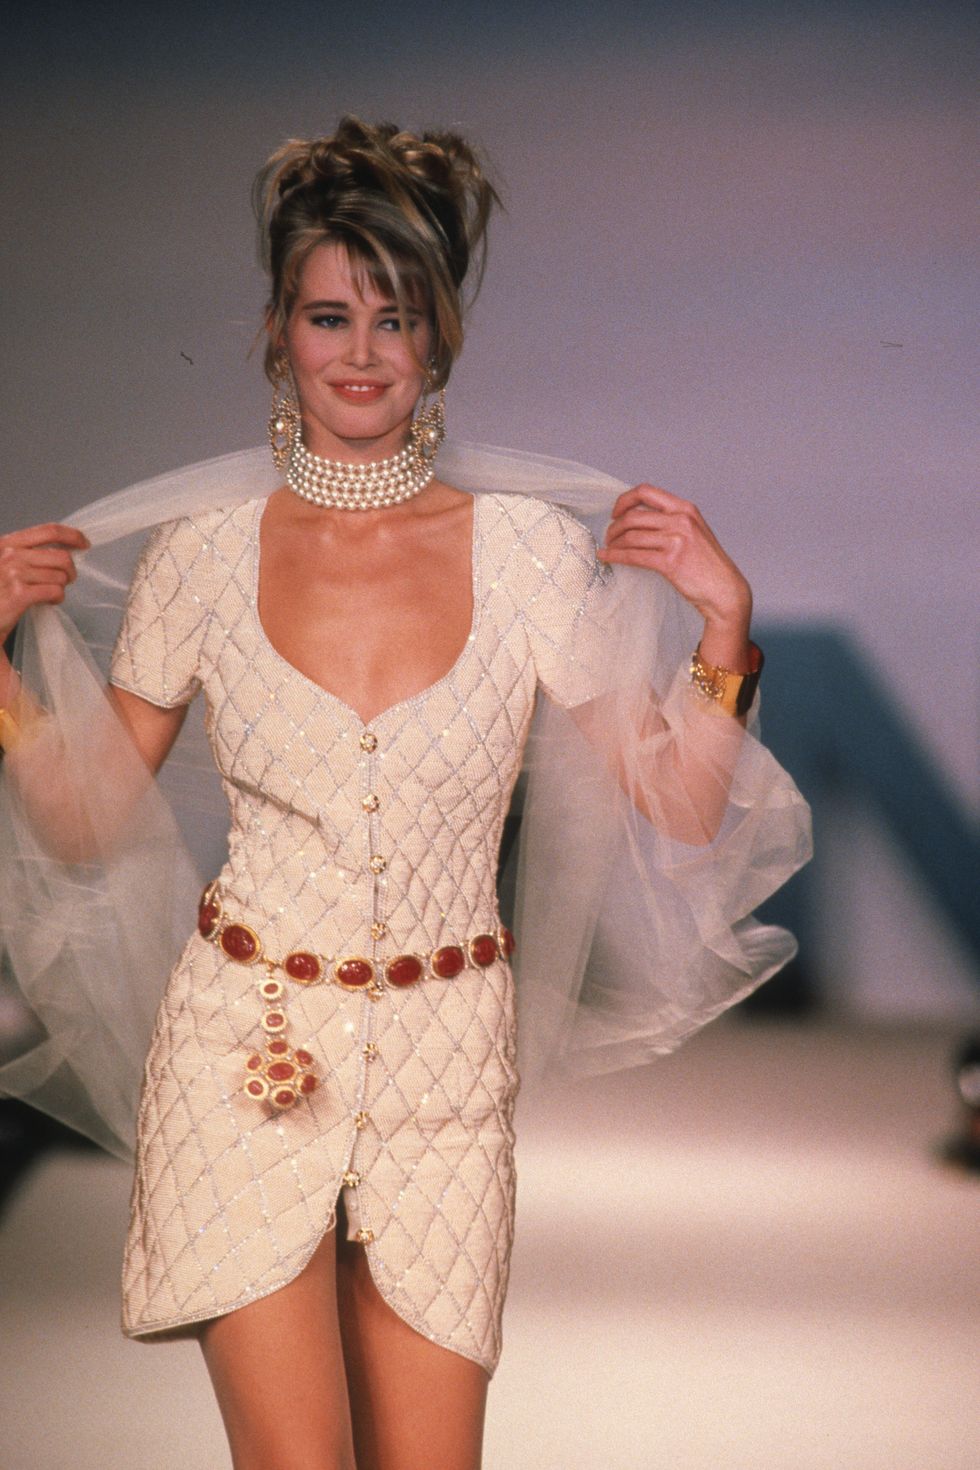 Karl Lagerfeld's Best Ever Runway Collections, As Chosen By Team